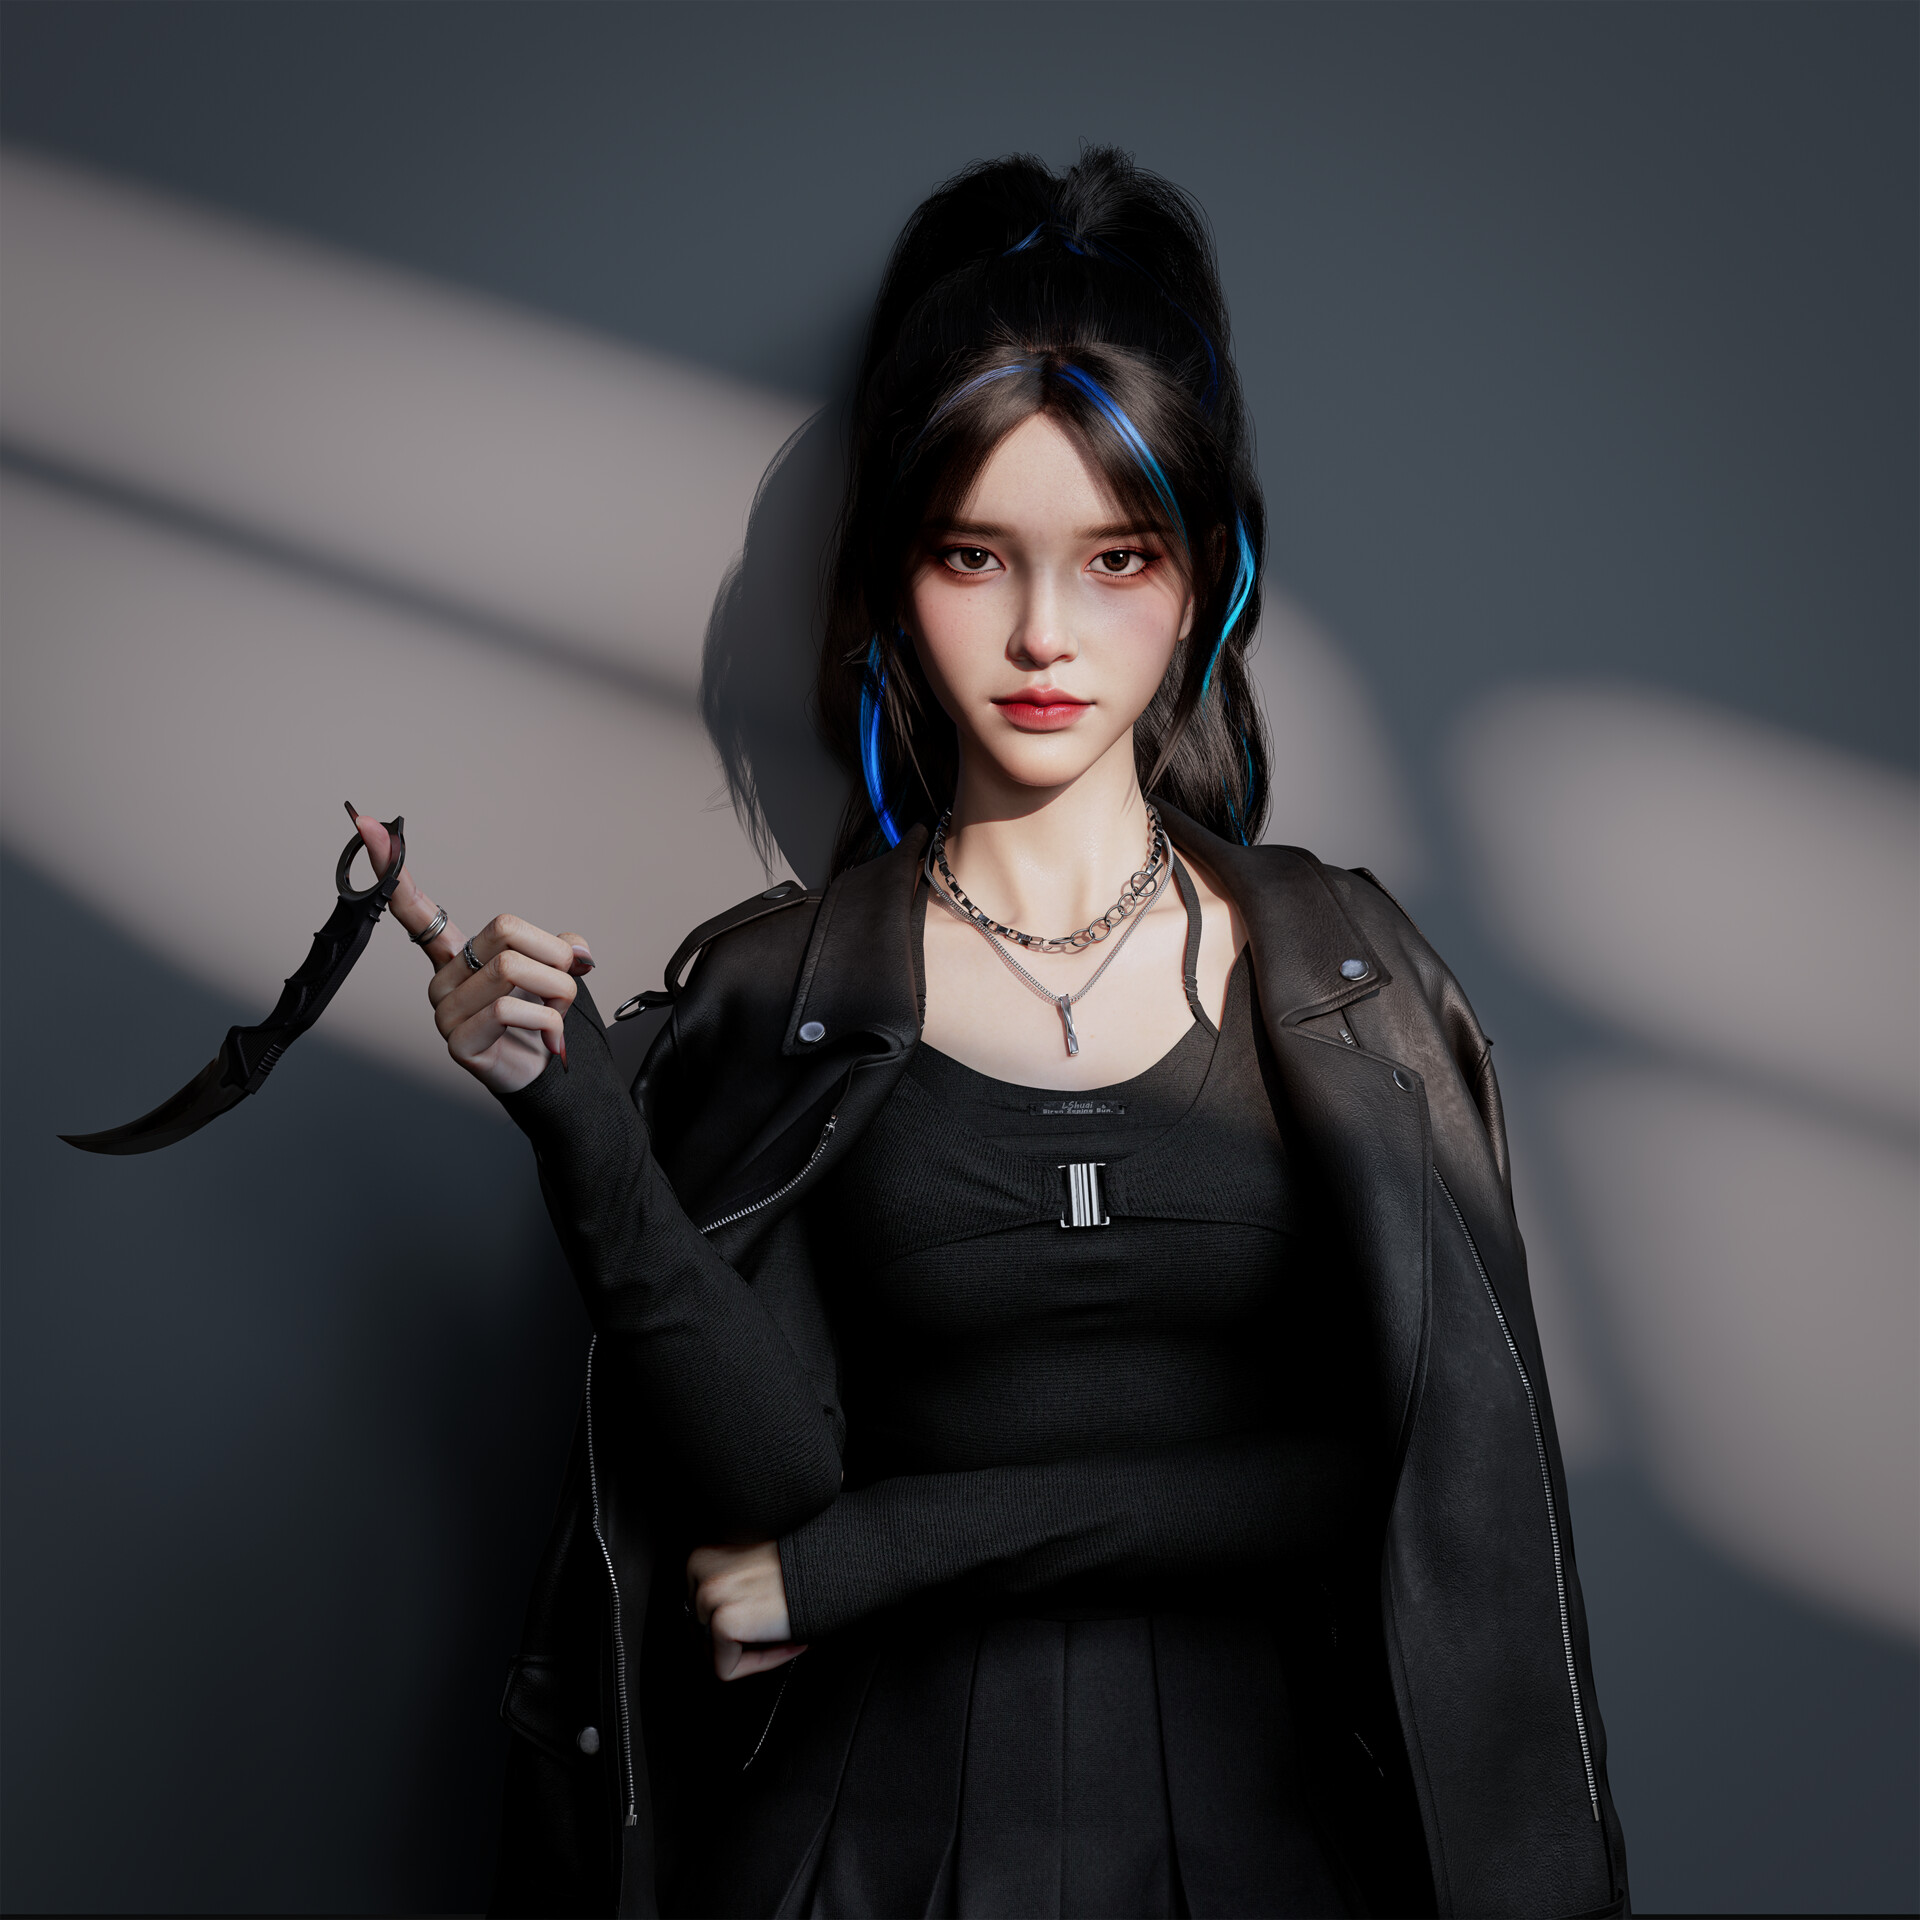 General 1920x1920 CGI simple background digital art women by the wall looking at viewer